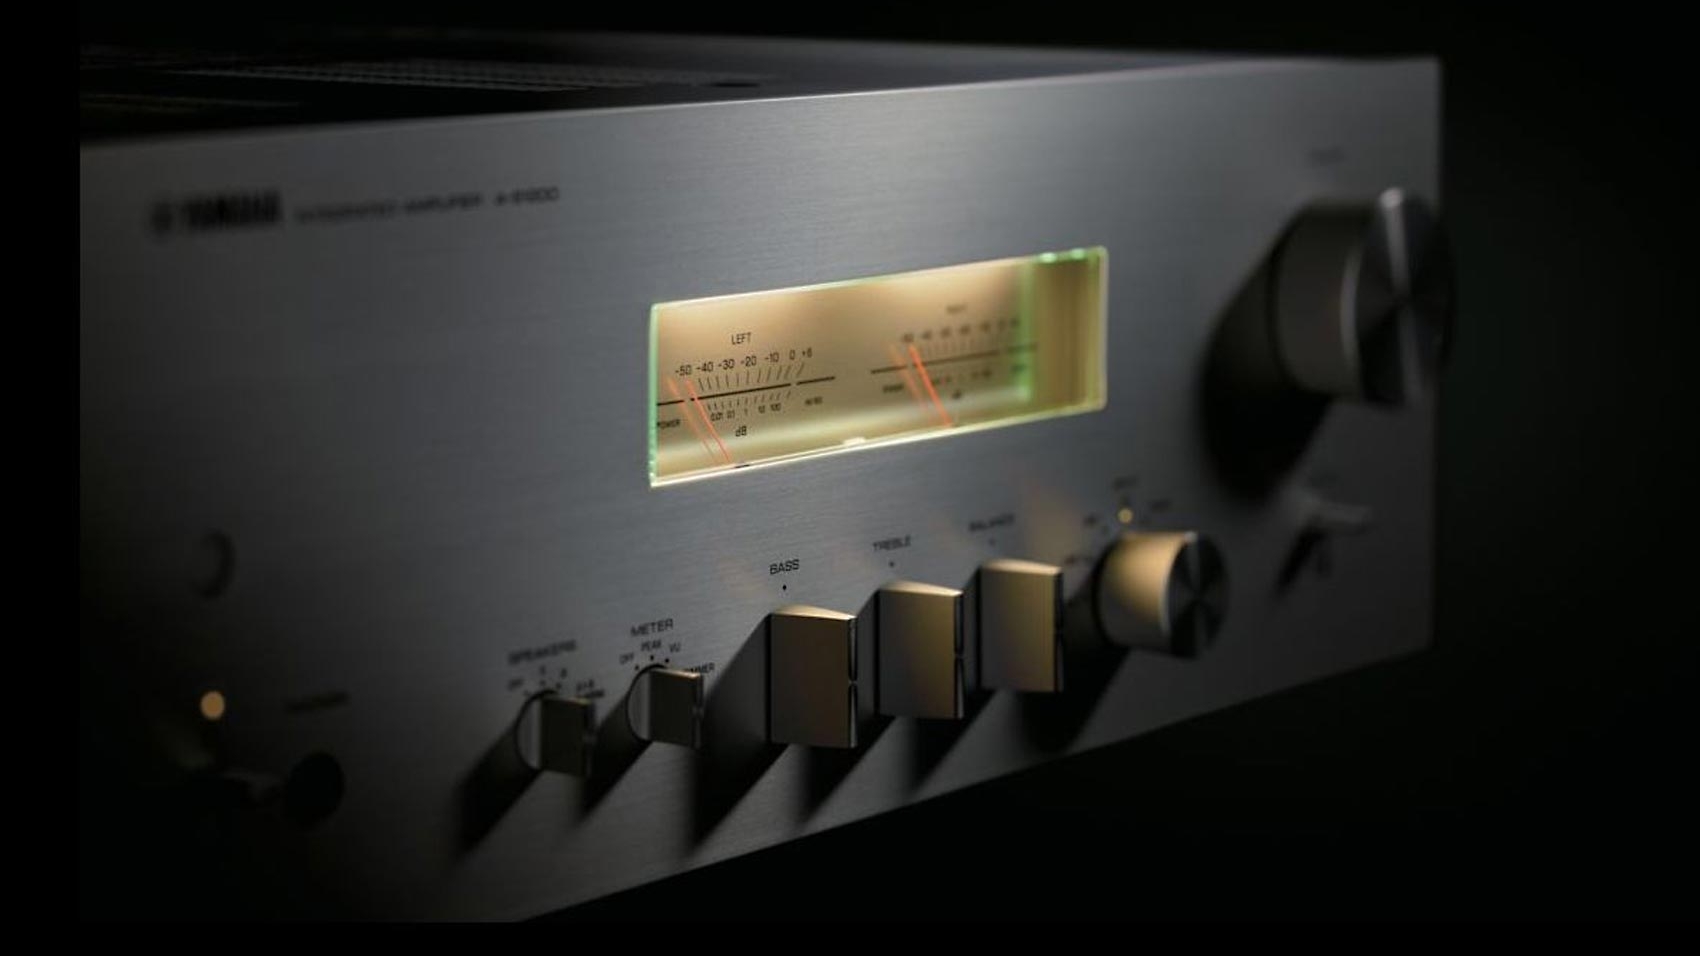 New Yamaha Stereo Amplifiers | AS-1200, AS-2200 & AS-3200 ...